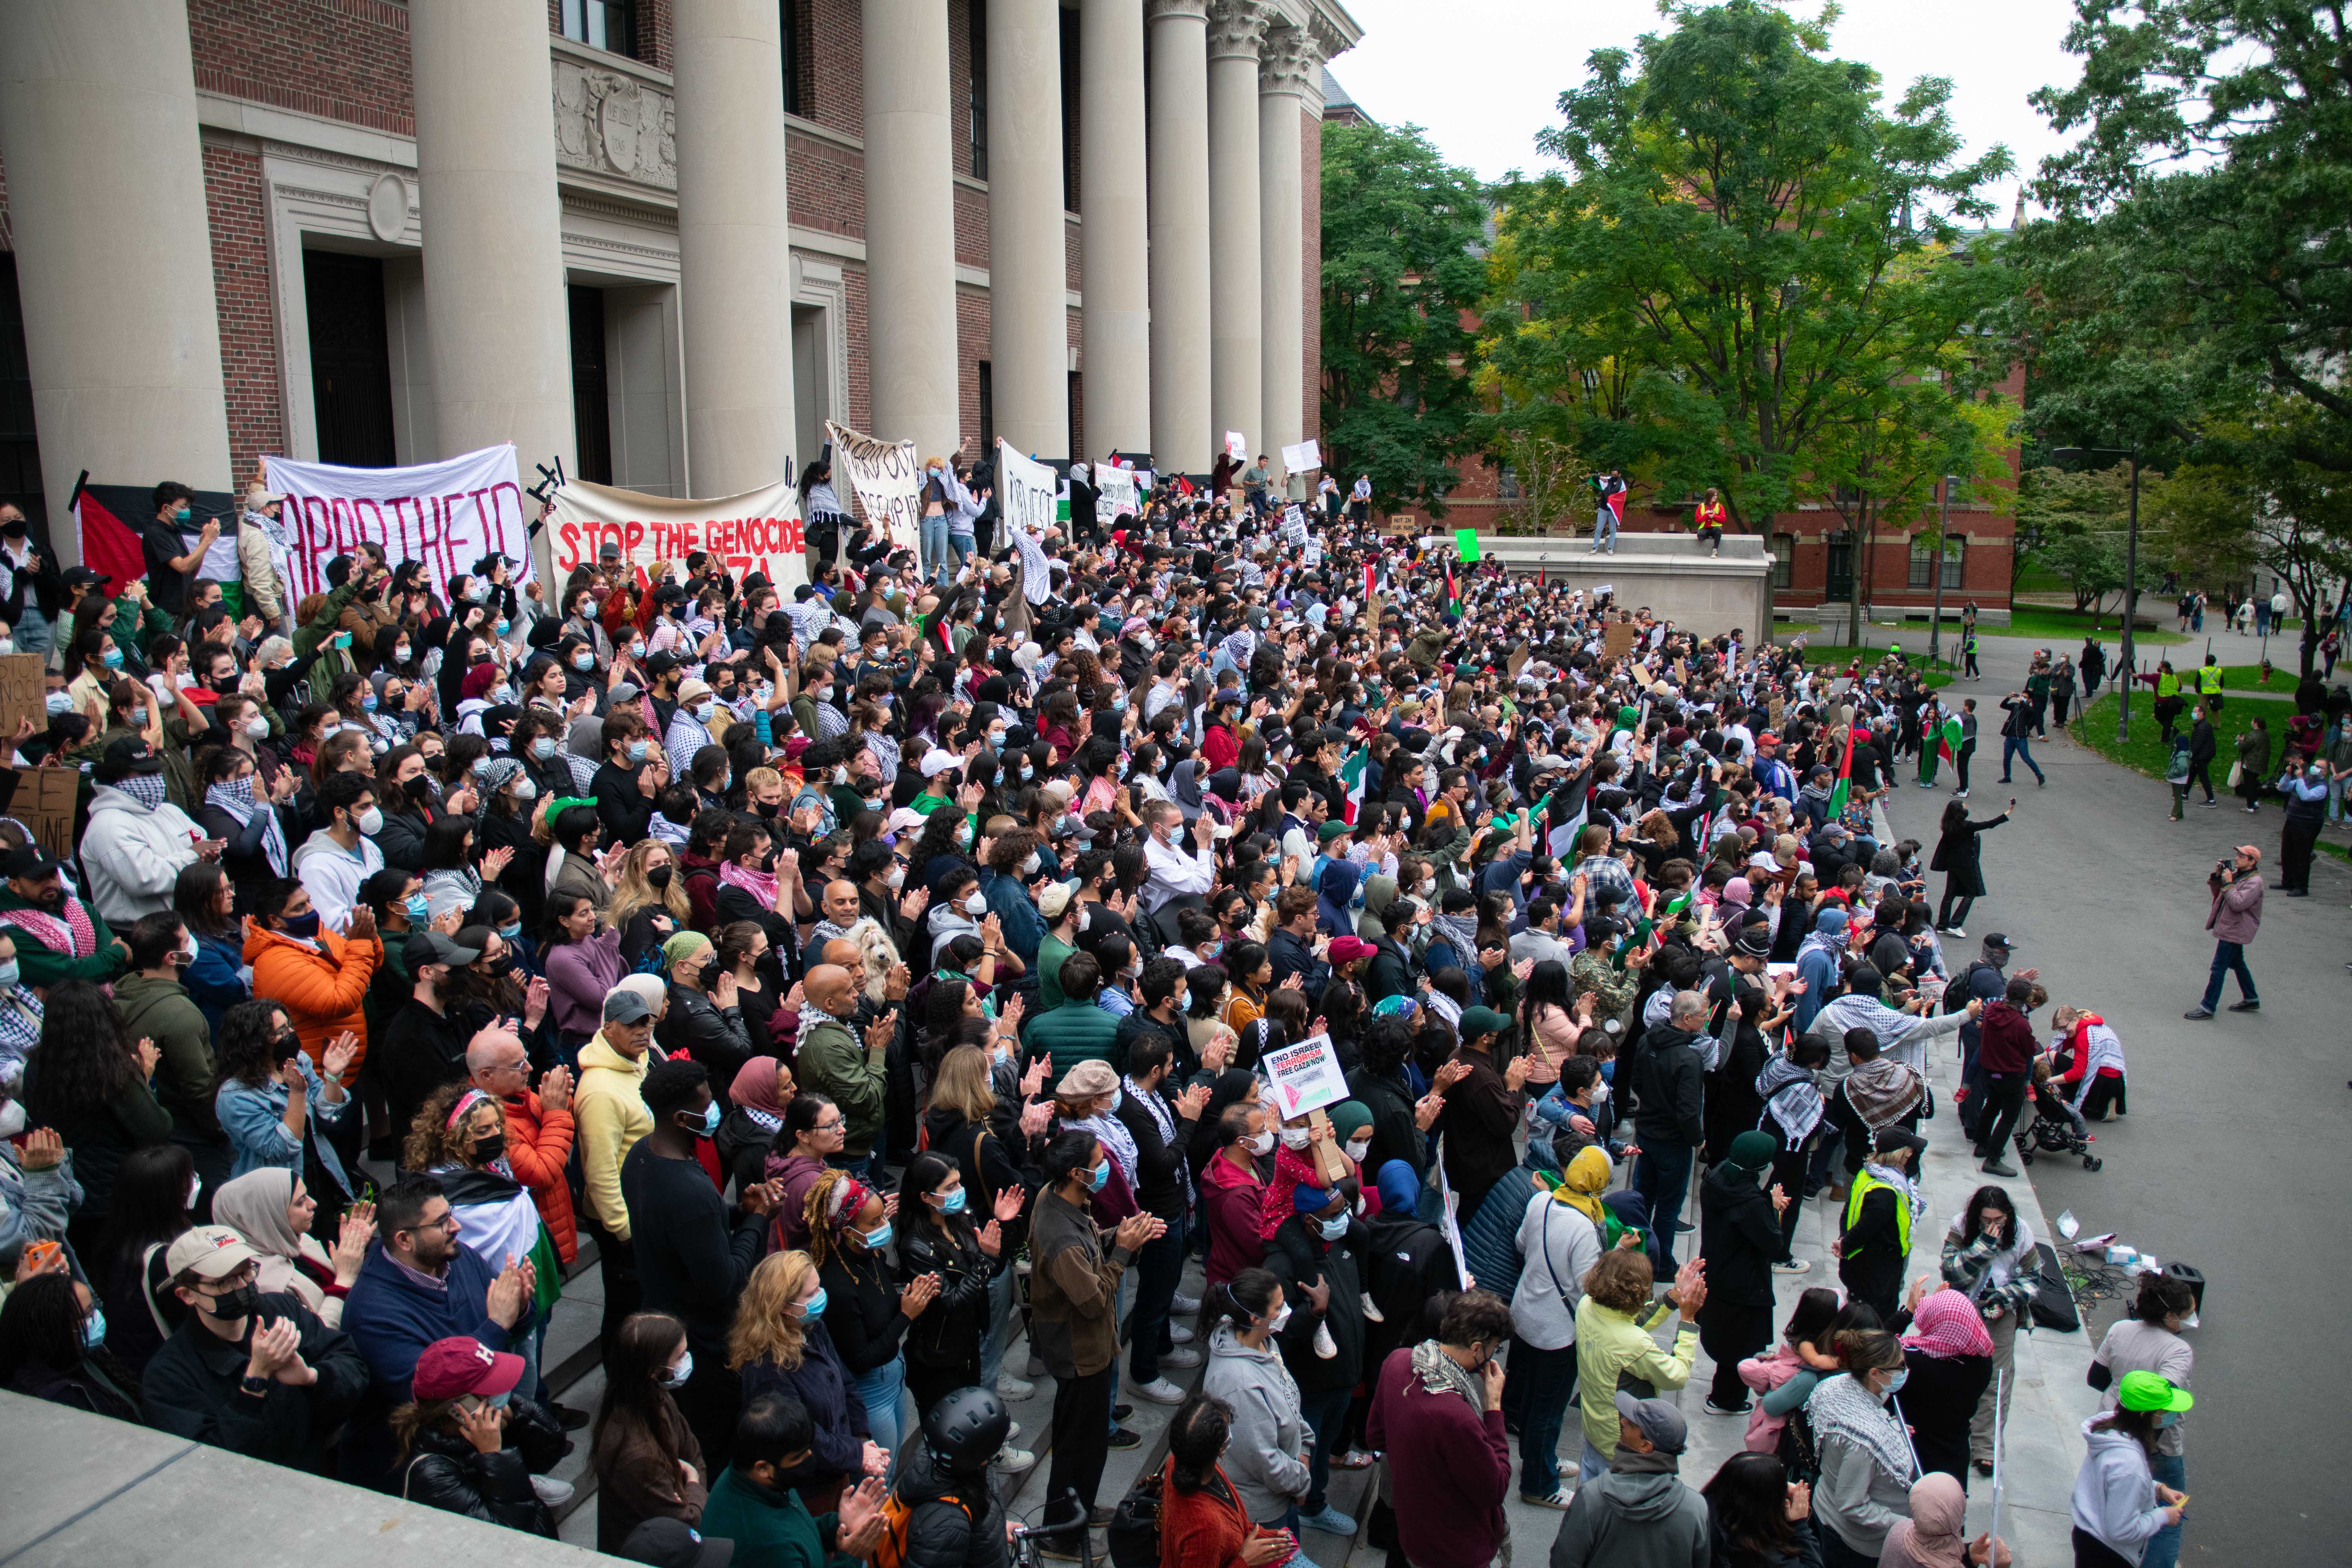 More than 1,000 demonstrators rally on the steps of Widener Library in Harvard Yard in support of Gaza. The protest came ahead of an expected ground invasion by Israel, and attendees condemned the University for a lack of support of Palestinian students and complicity in what they called Israeli “genocide.”